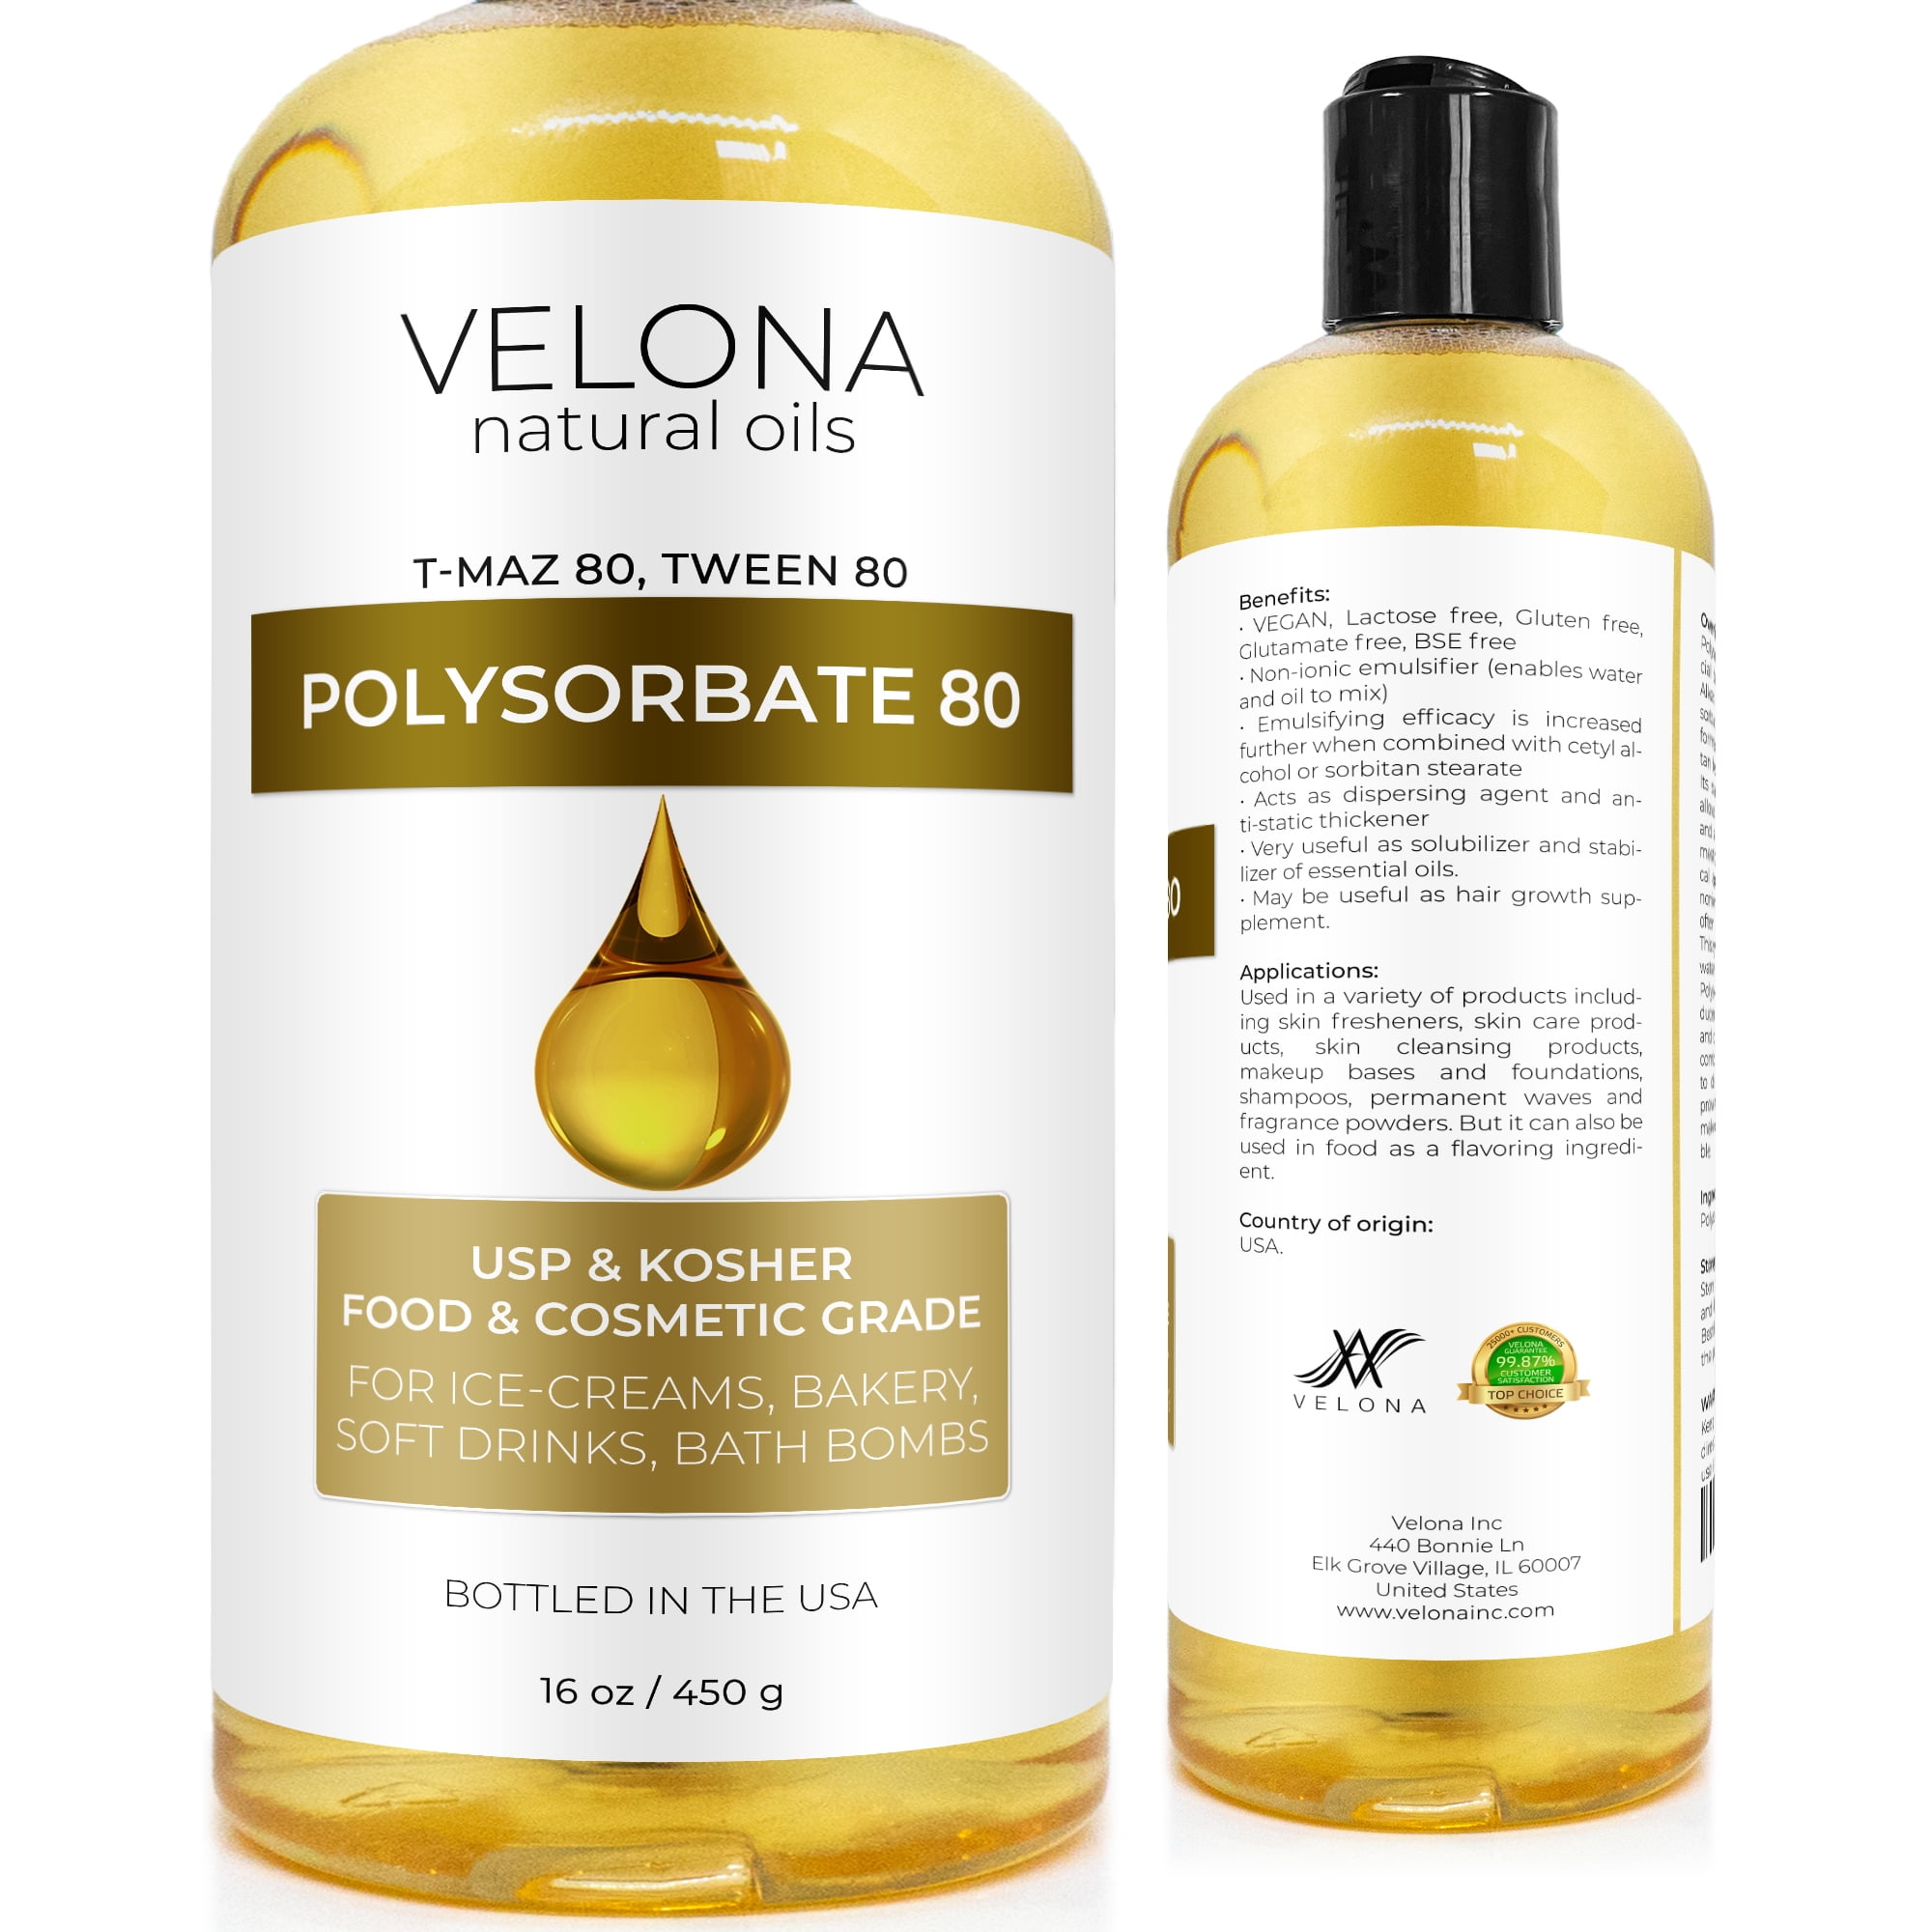 Polysorbate 80: Why Is Polysorbate 80 In My Product? Is It Safe To